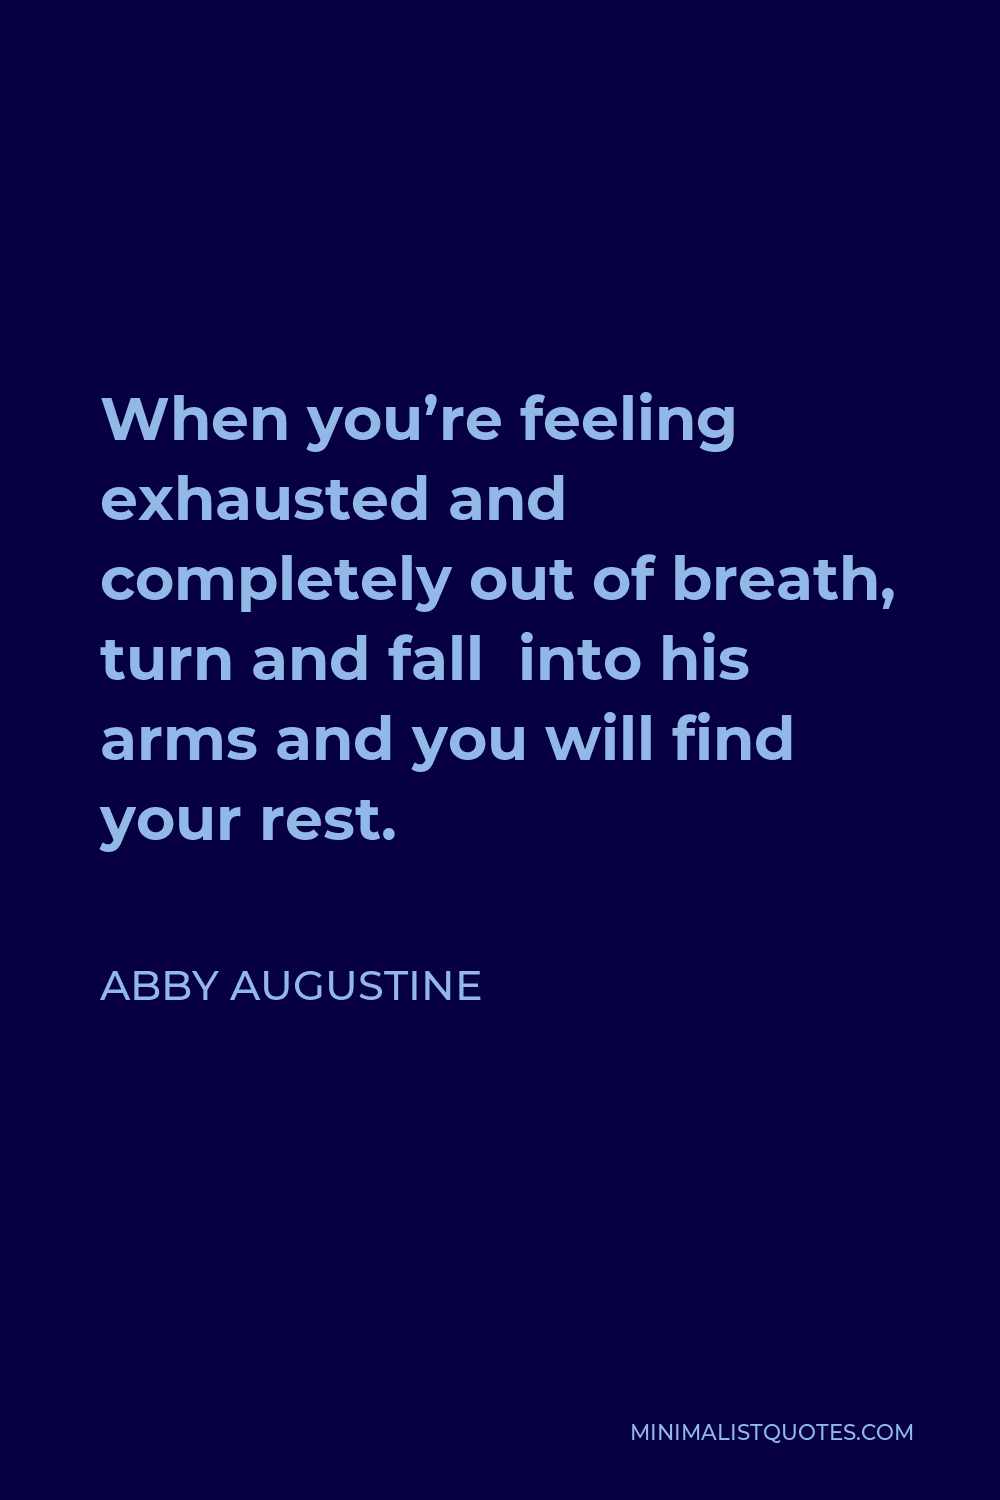 Abby Augustine Quote - When you’re feeling exhausted and completely out of breath, turn and fall into his arms and you will find your rest.